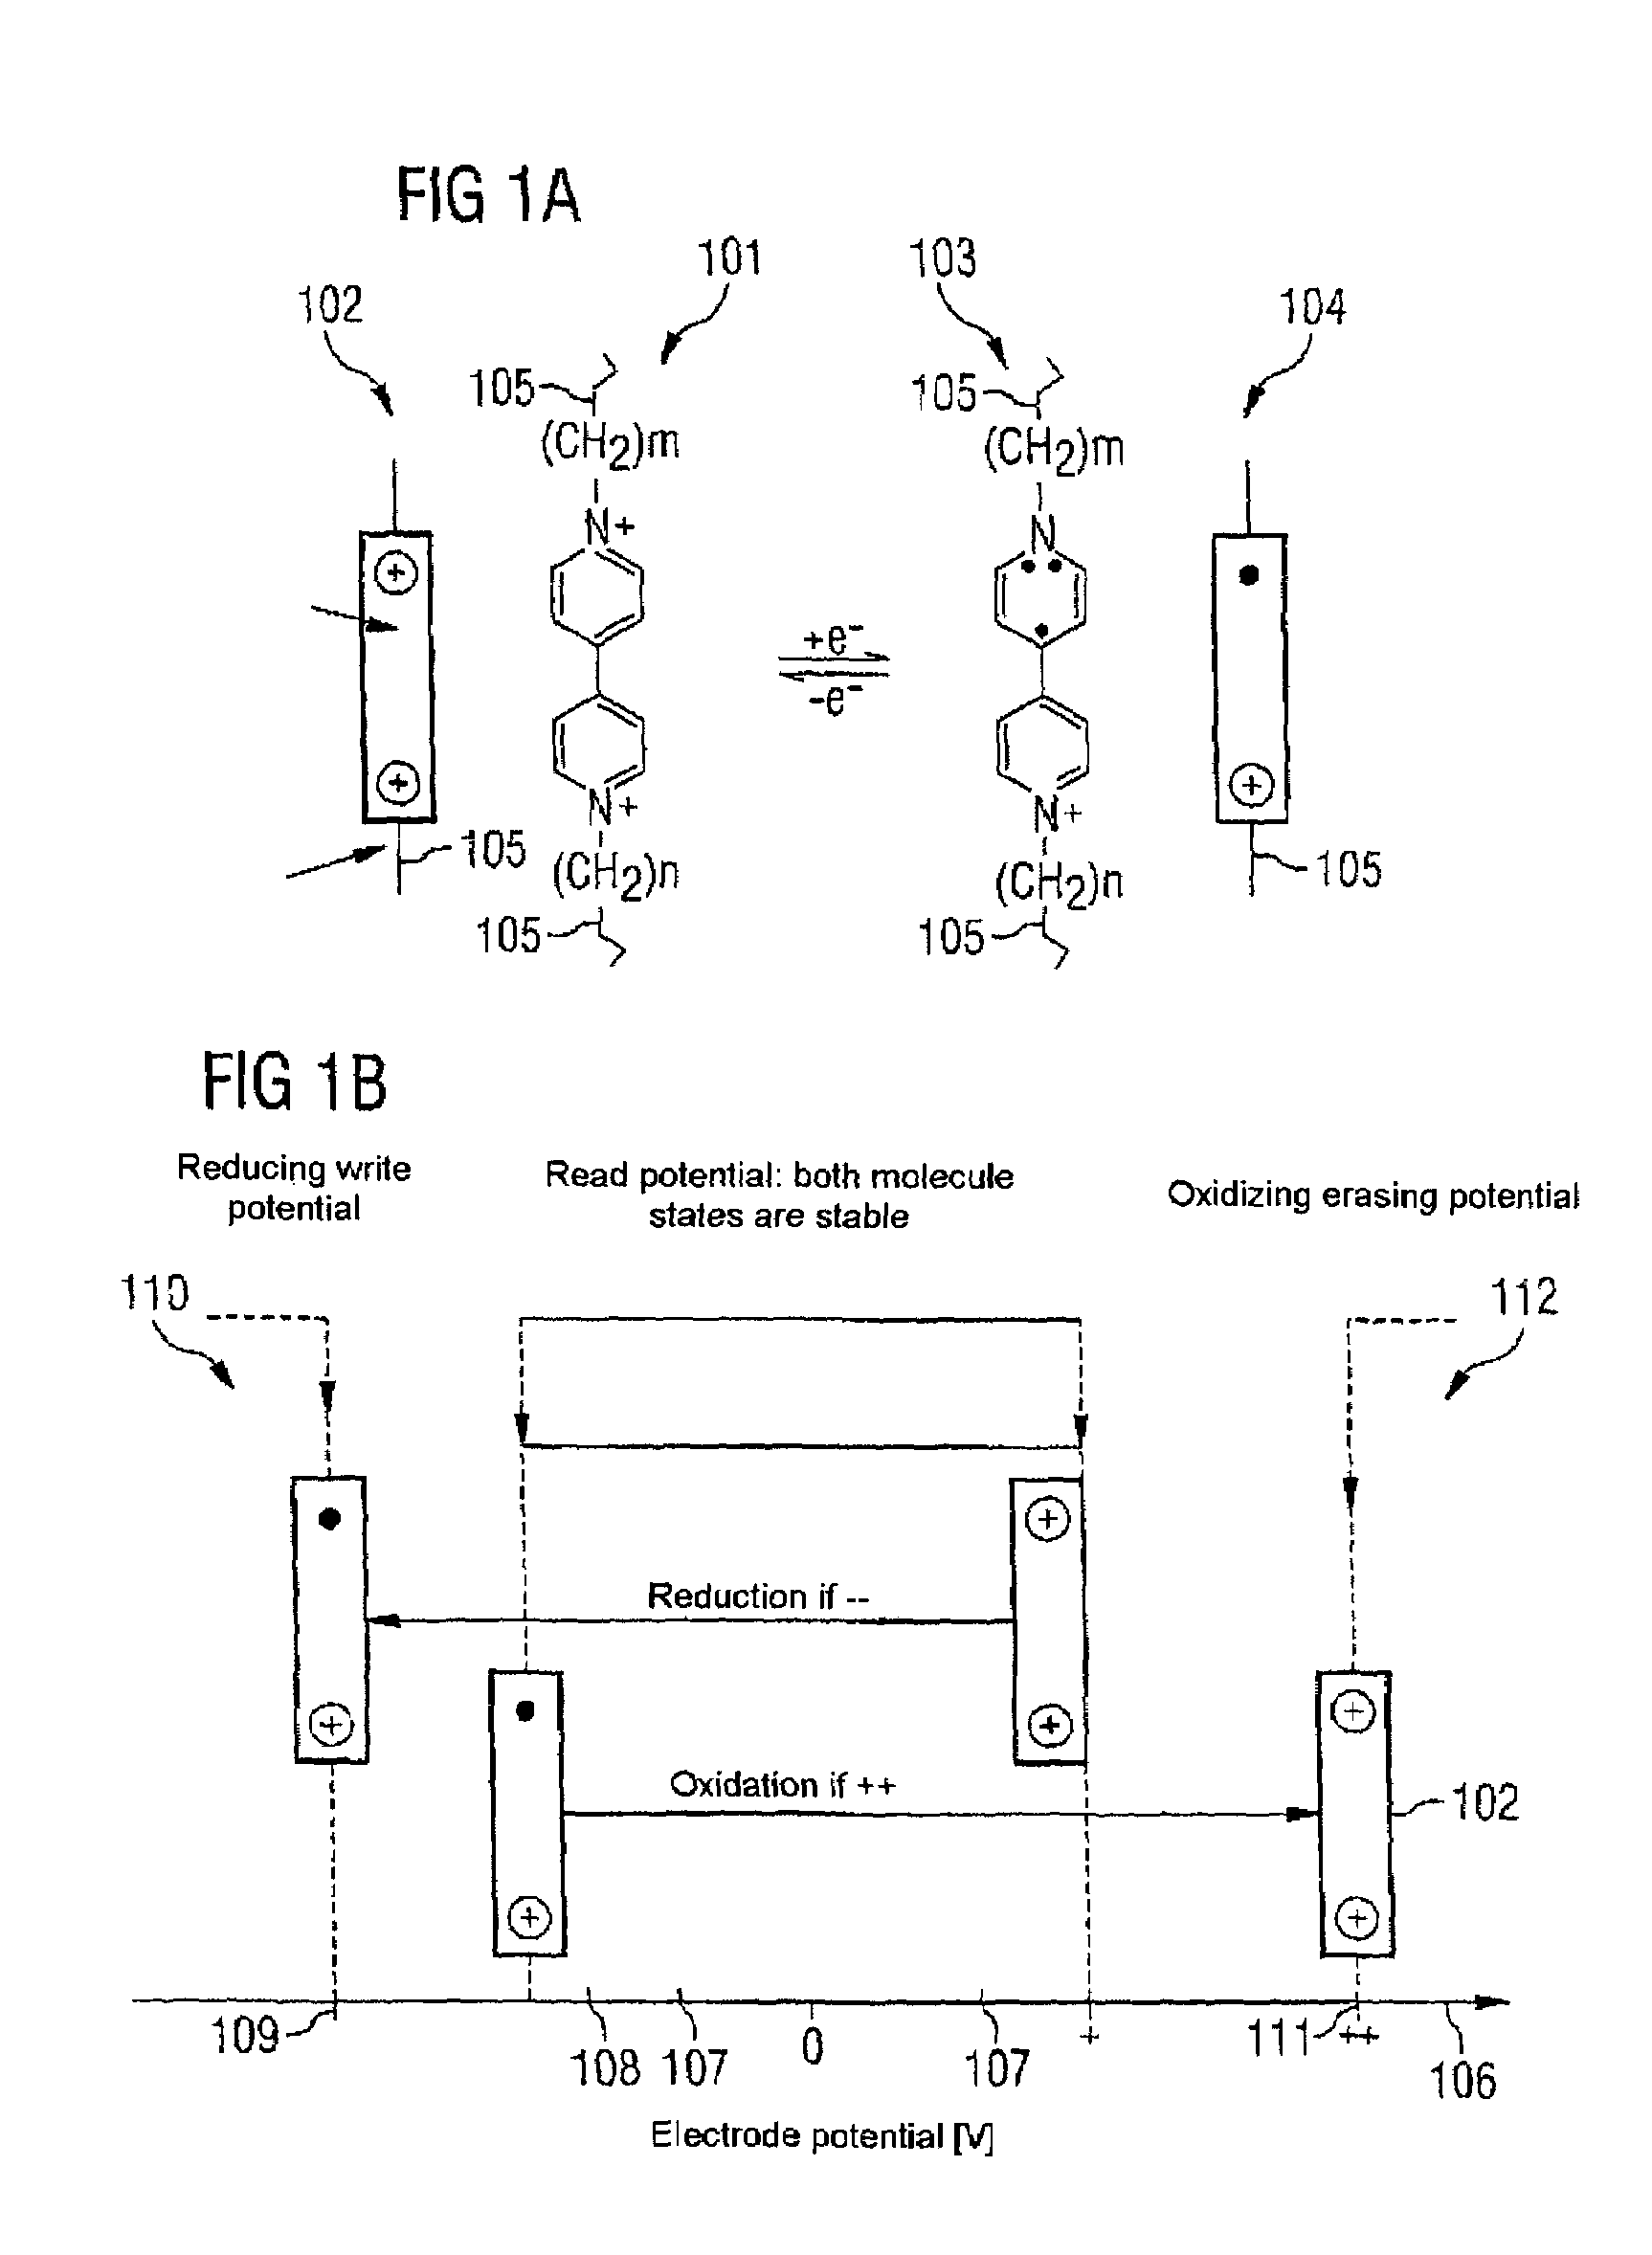 Circuit element having a first layer composed of an electrically insulating substrate material, a method for producing a circuit element, bispyridinium compounds and their use in circuit elements